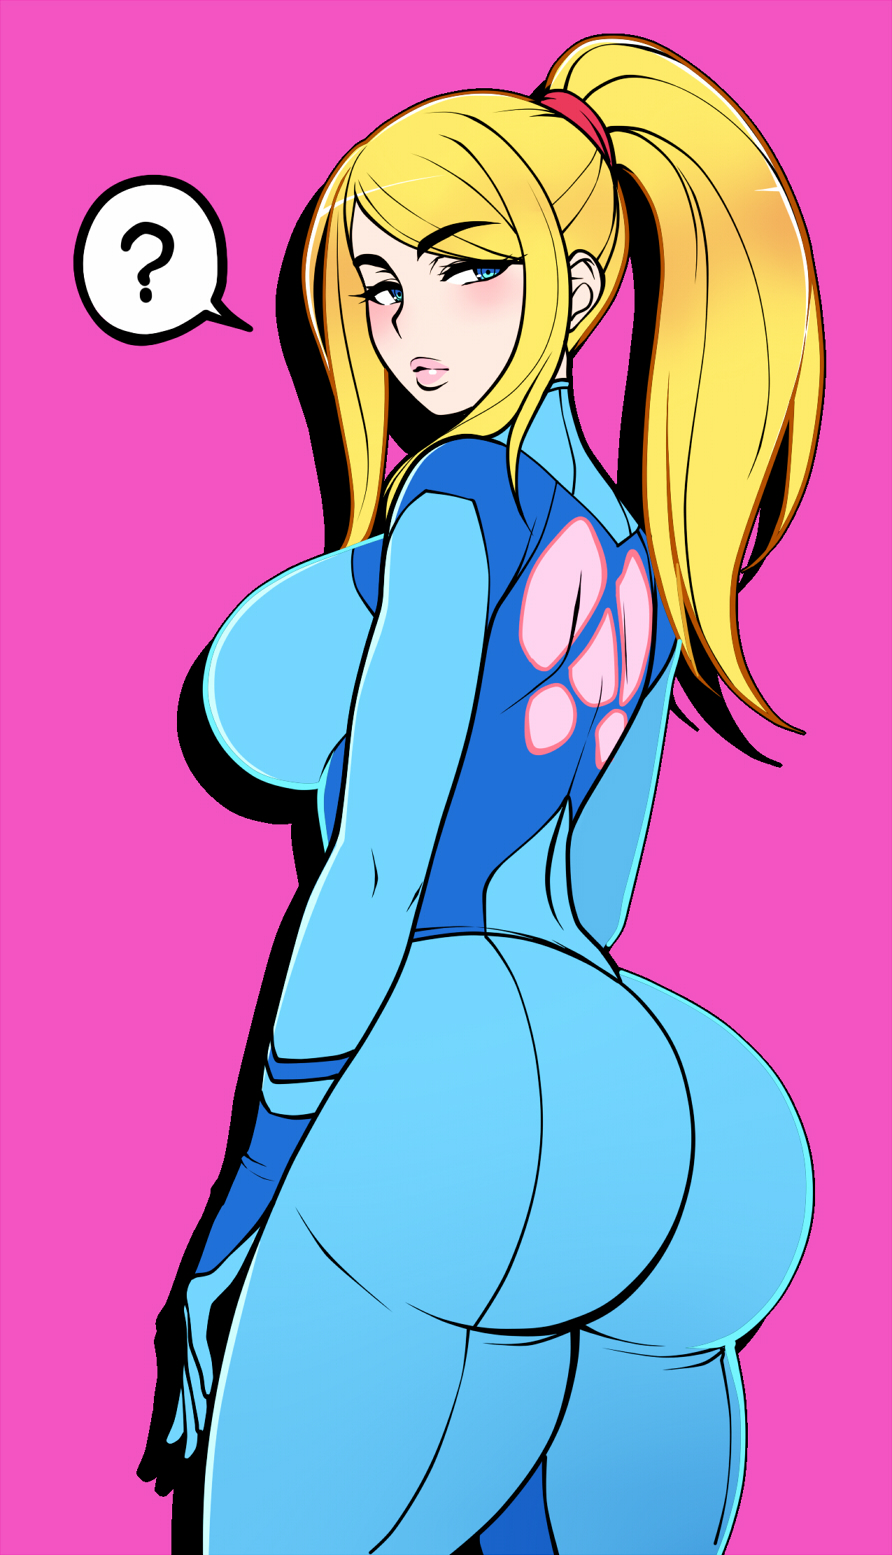 1_girl 1girl ass big_breasts blonde blonde_hair blue_eyes clothed dat_ass female female_only huge_ass jam-orbital long_hair looking_at_viewer metroid nintendo ponytail samus_aran sideboob solo standing tight_clothes zero_suit